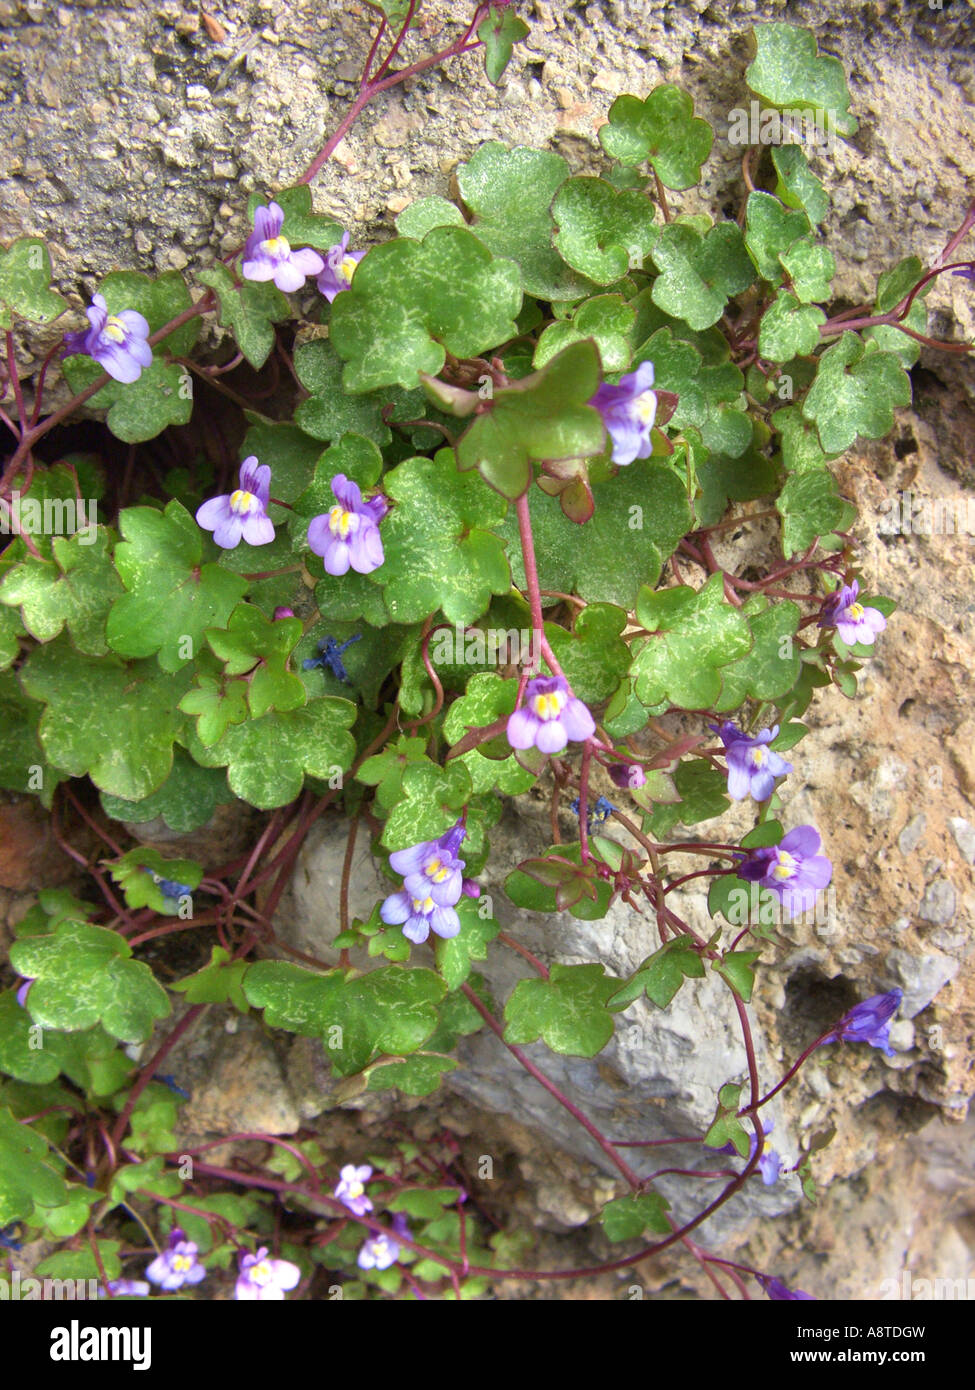 kenilworth ivy, ivy-leaved toadflax (Cymbalaria muralis, Linaria muralis), blooming plant in a stone wall, Spain, Majorca Stock Photo